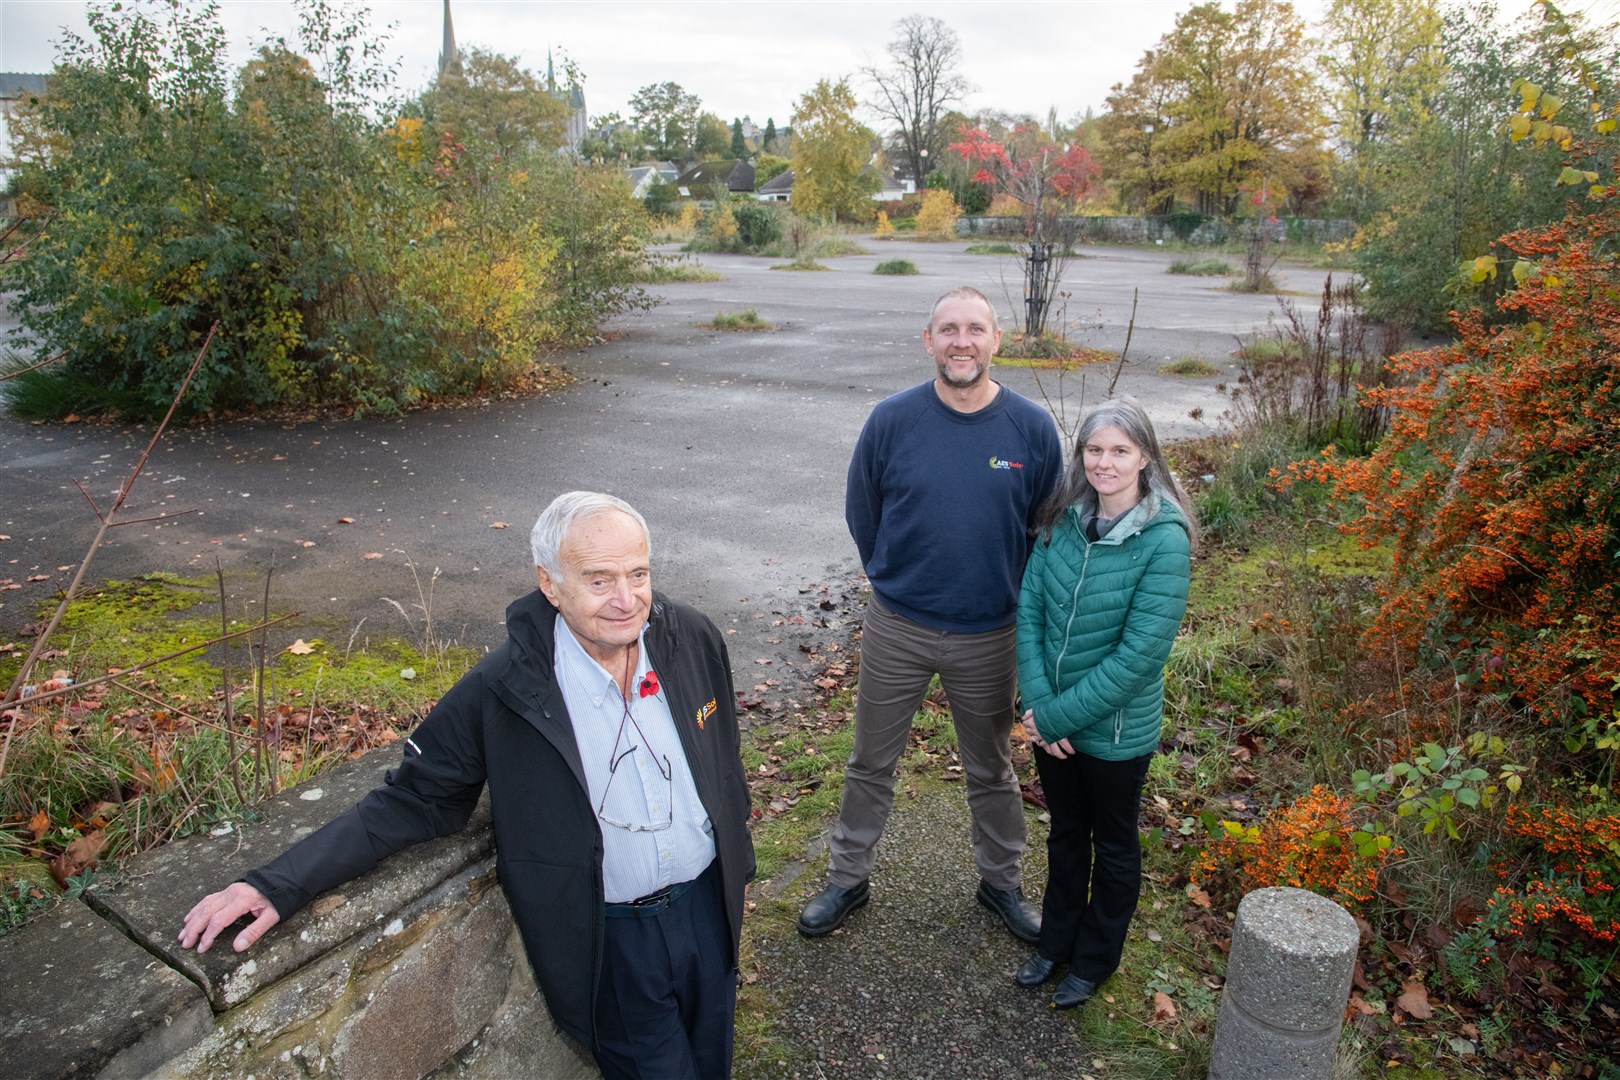 AES Solar in Forres has taken over the former Tesco site. From left: George Goudsmit (managing director), Campbell MacLennan (technical director) and Lynn Davidson (finance director). Picture: Daniel Forsyth.